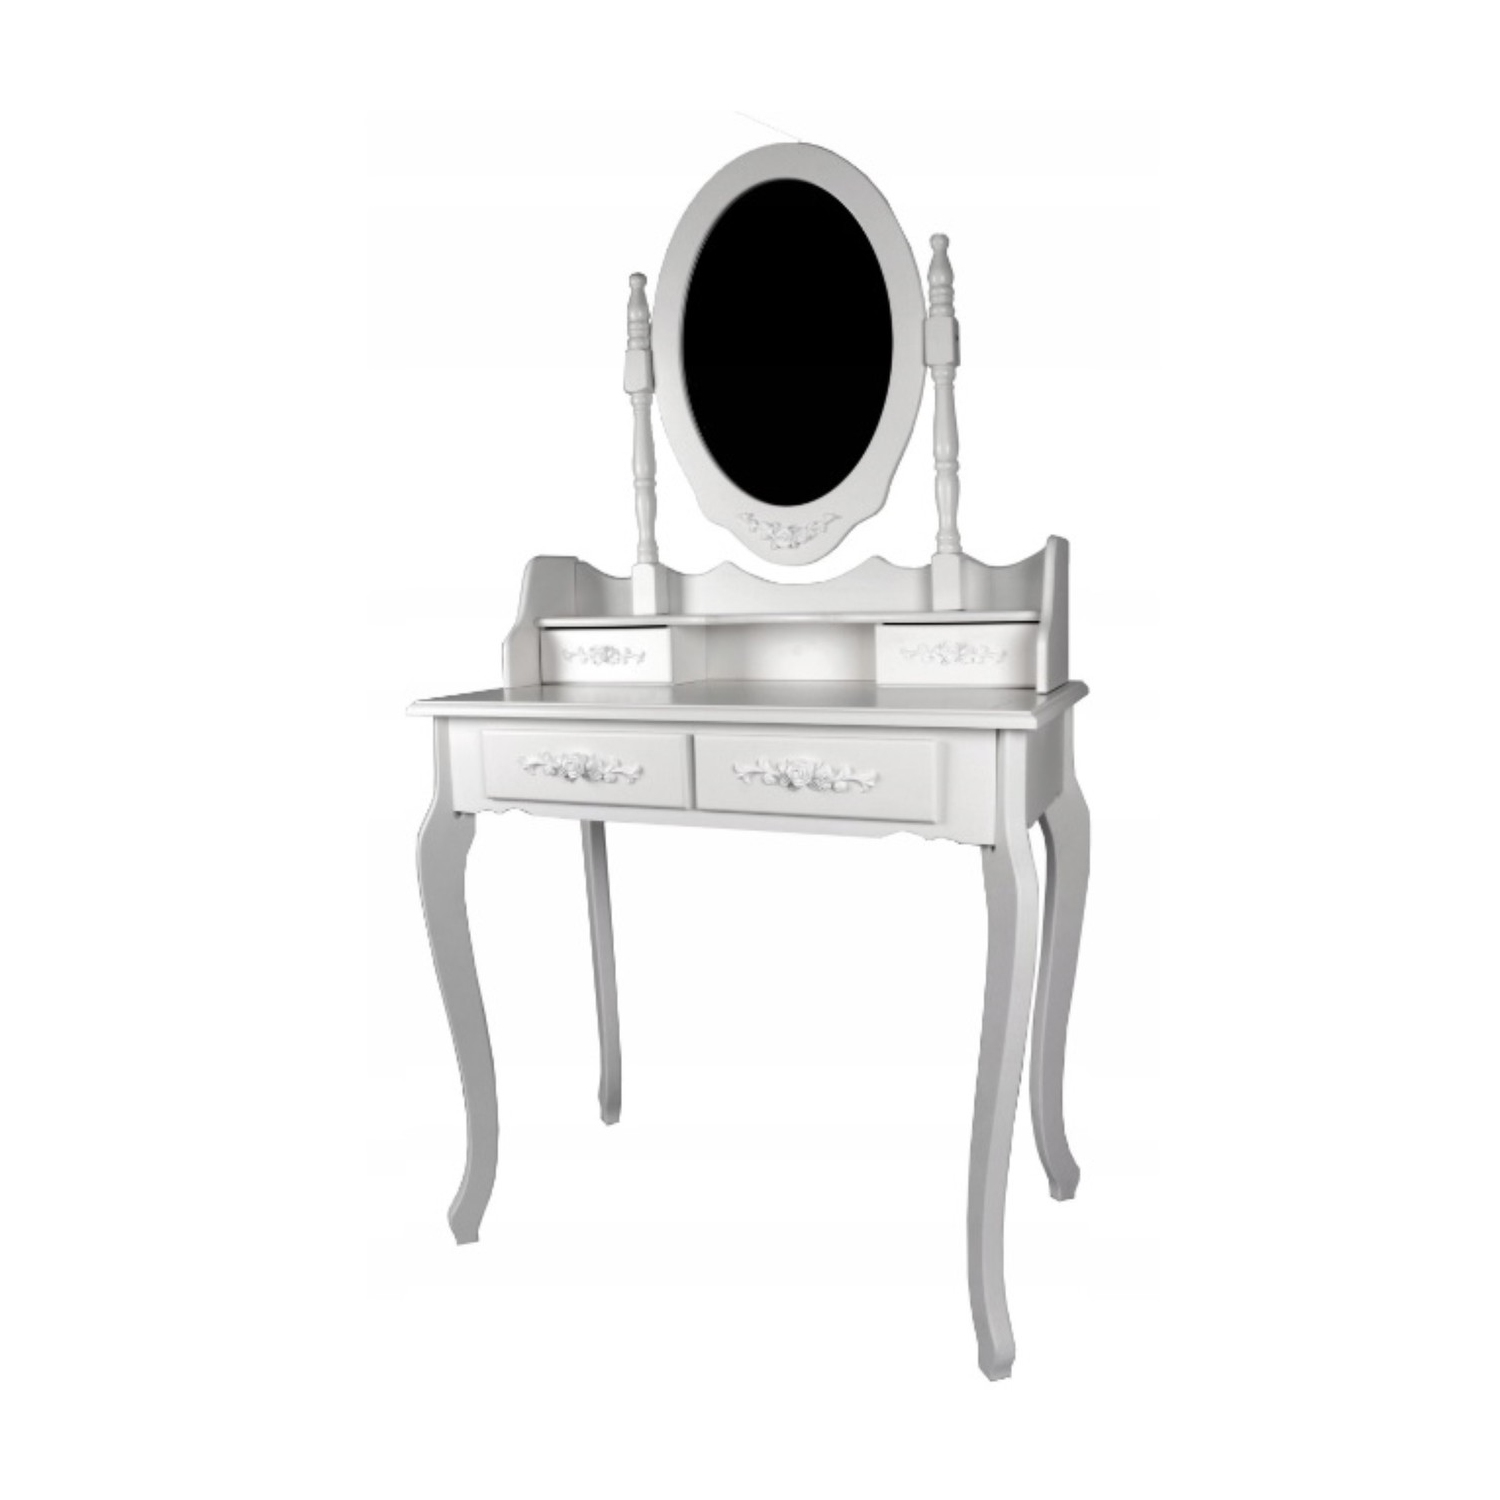 Viscologic Pearl Wooden Mirrored Makeup, Viscologic Pearl Wooden Mirrored Makeup Vanity Table